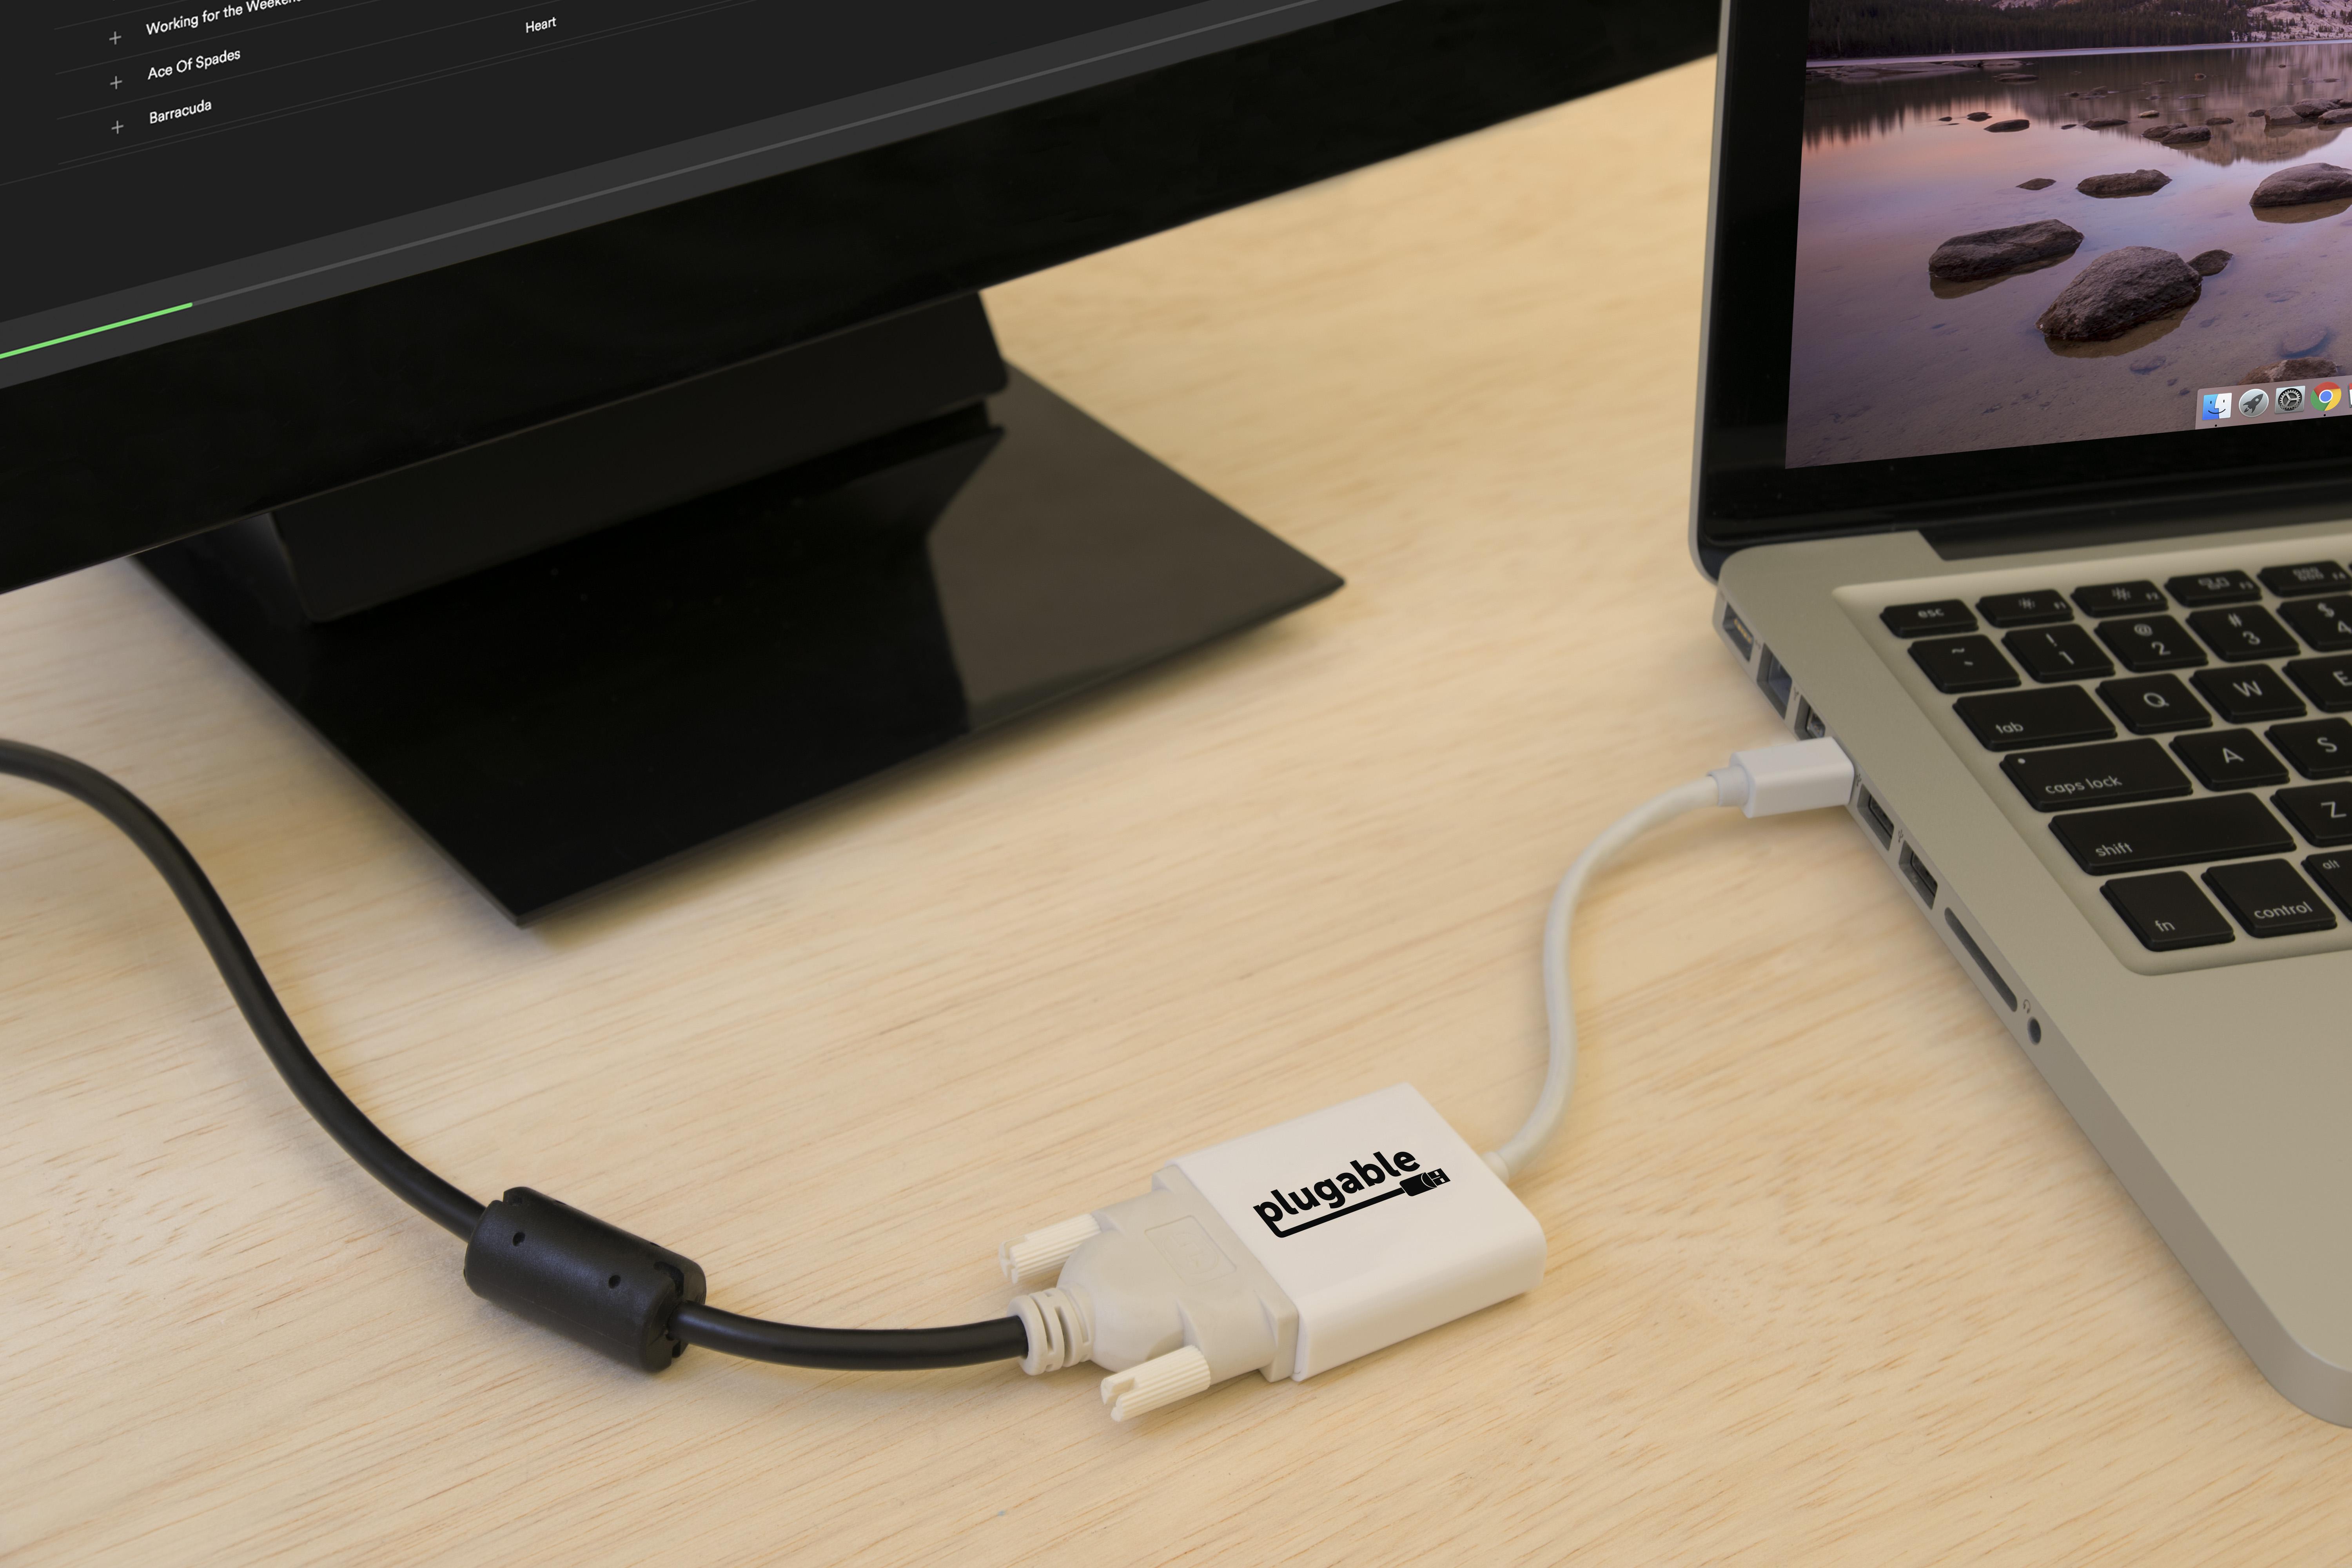 Plugable Mini DisplayPort (Thunderbolt 2) to DVI Adapter (Supports Mac, Windows, Linux Systems and Displays up to 1920x1200@60Hz, Passive). - image 2 of 4